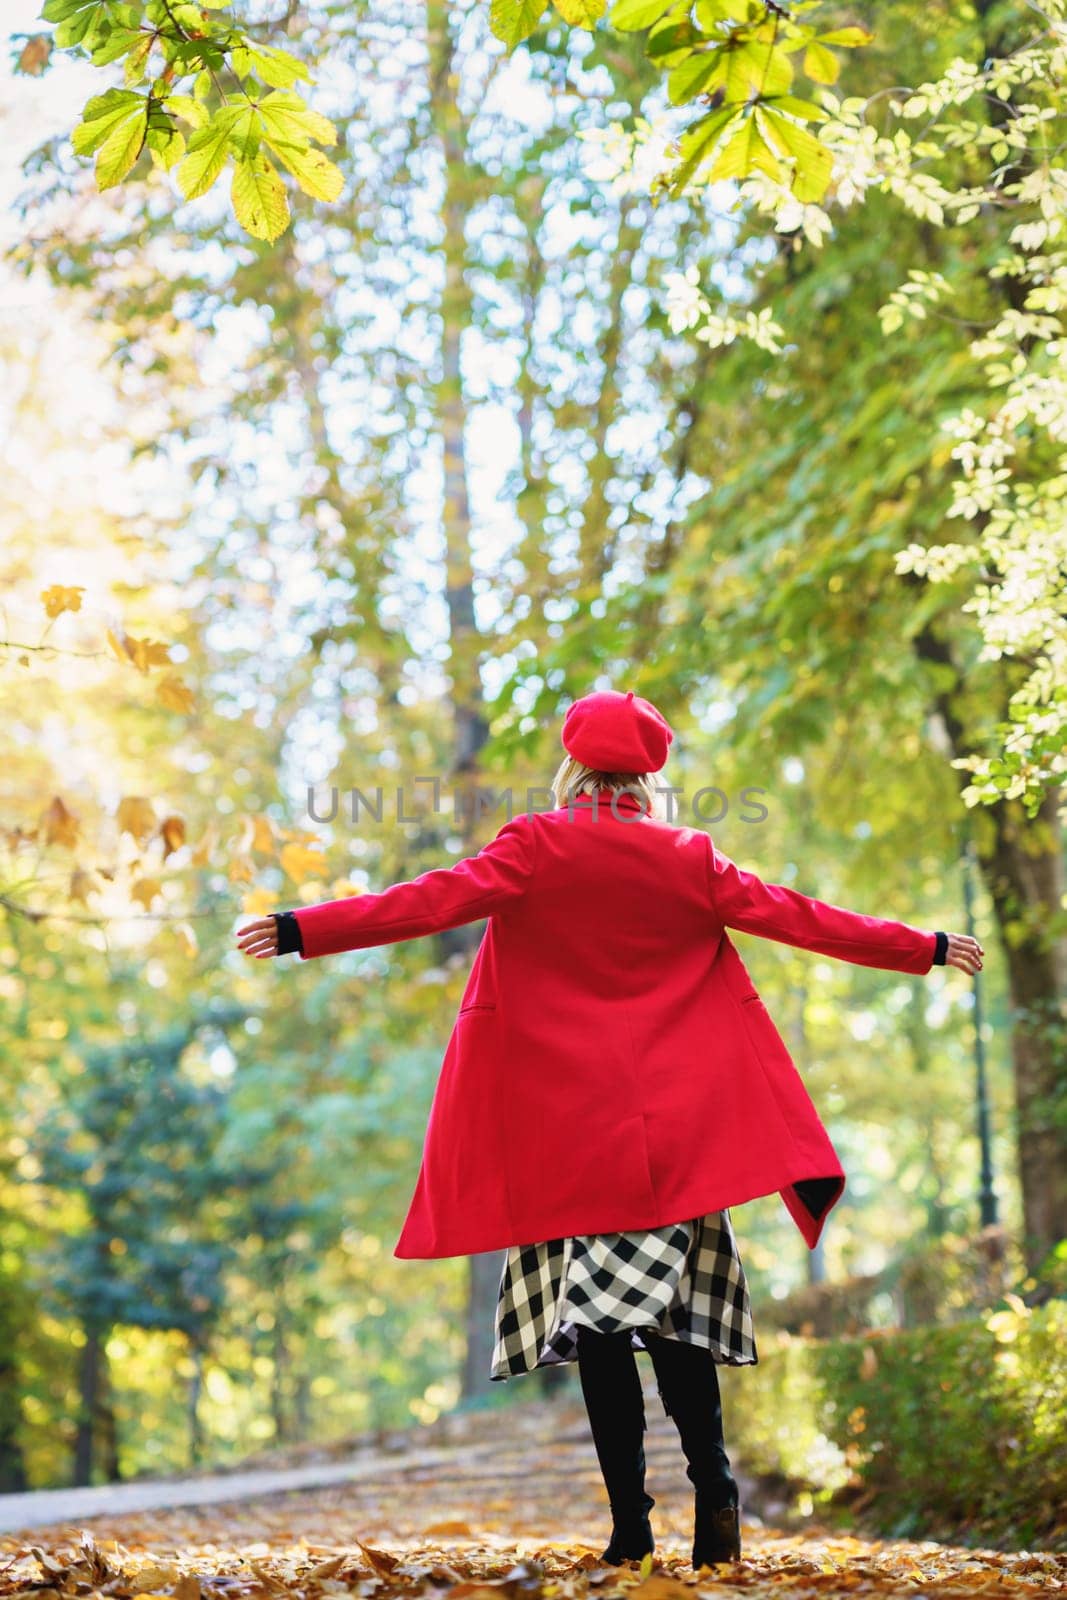 Full body back view of anonymous female in red outfit standing with spread arms on path with fallen leaves in autumn park